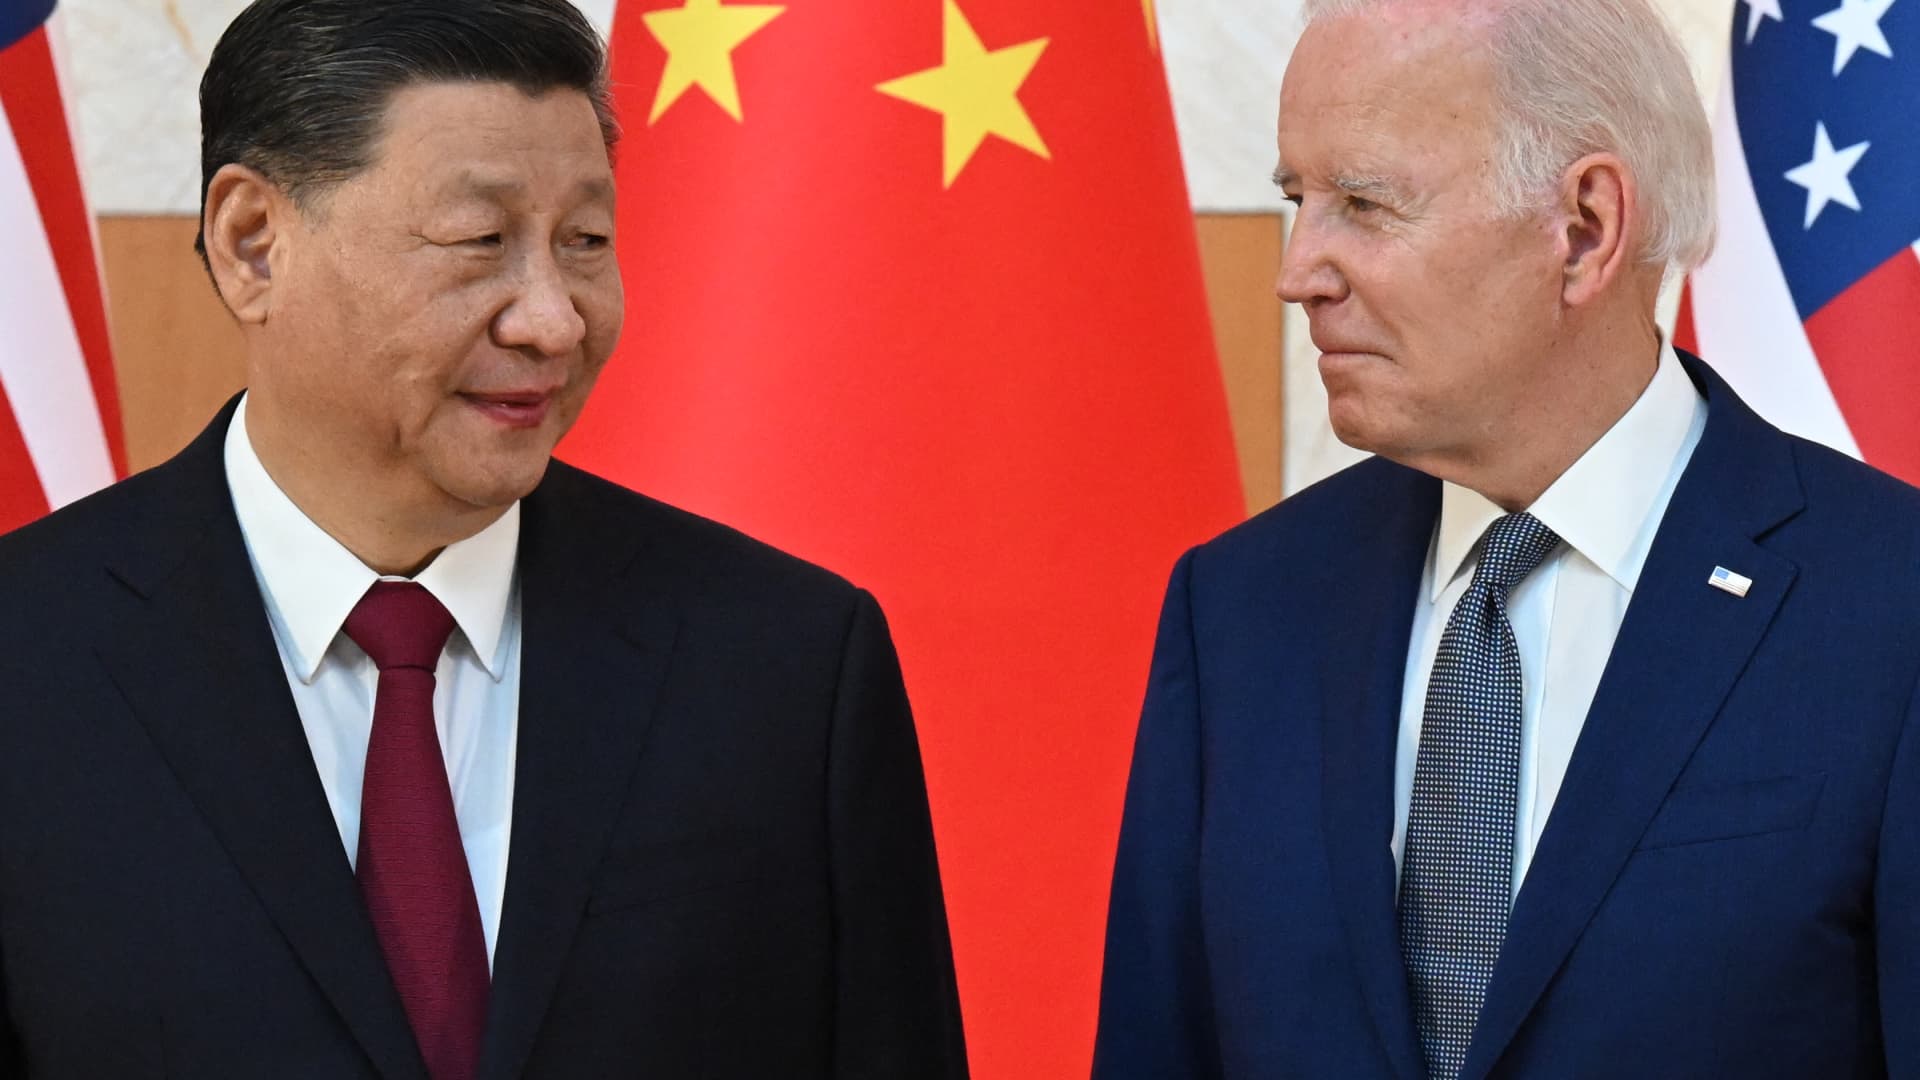 US-China ties on dangerous path with no trust on both sides: Roach, Cohen